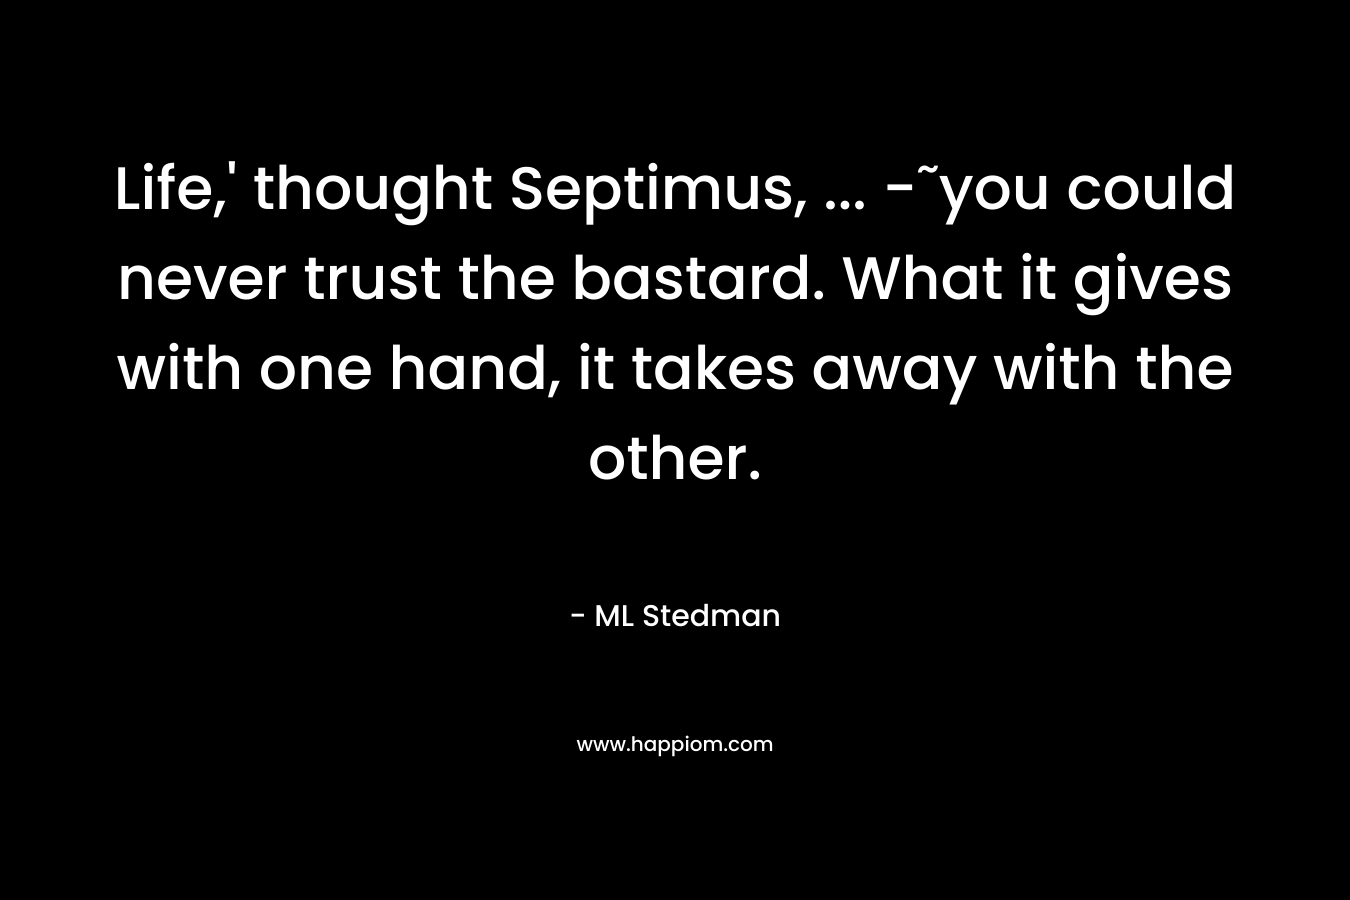 Life,’ thought Septimus, … -˜you could never trust the bastard. What it gives with one hand, it takes away with the other. – ML Stedman